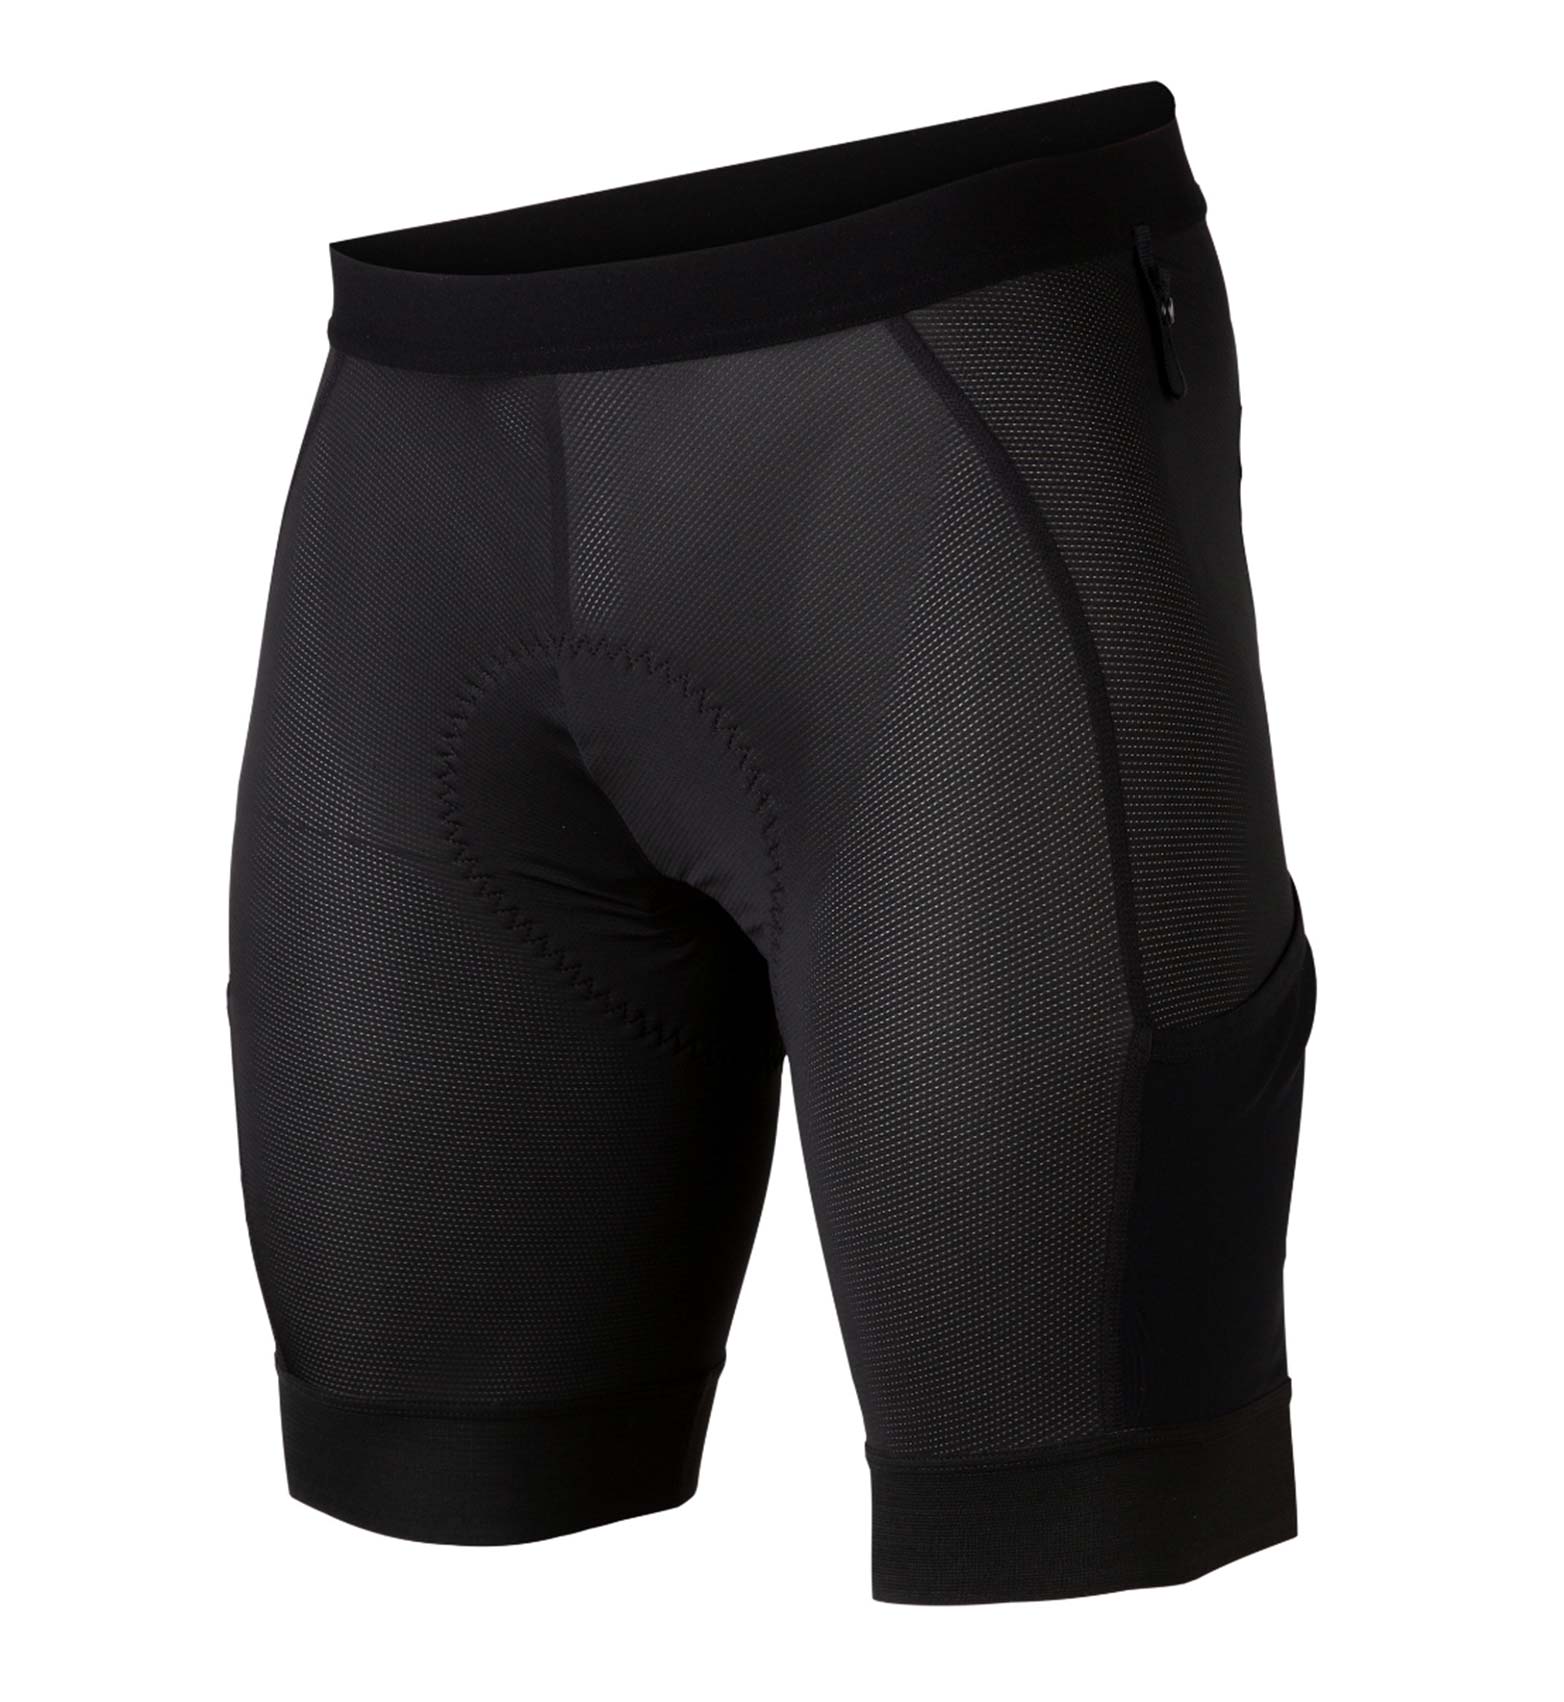 These shorts have a built-in performance liner. The shell is constructed  from a technical ripstop material with four-way stretch. Our ne